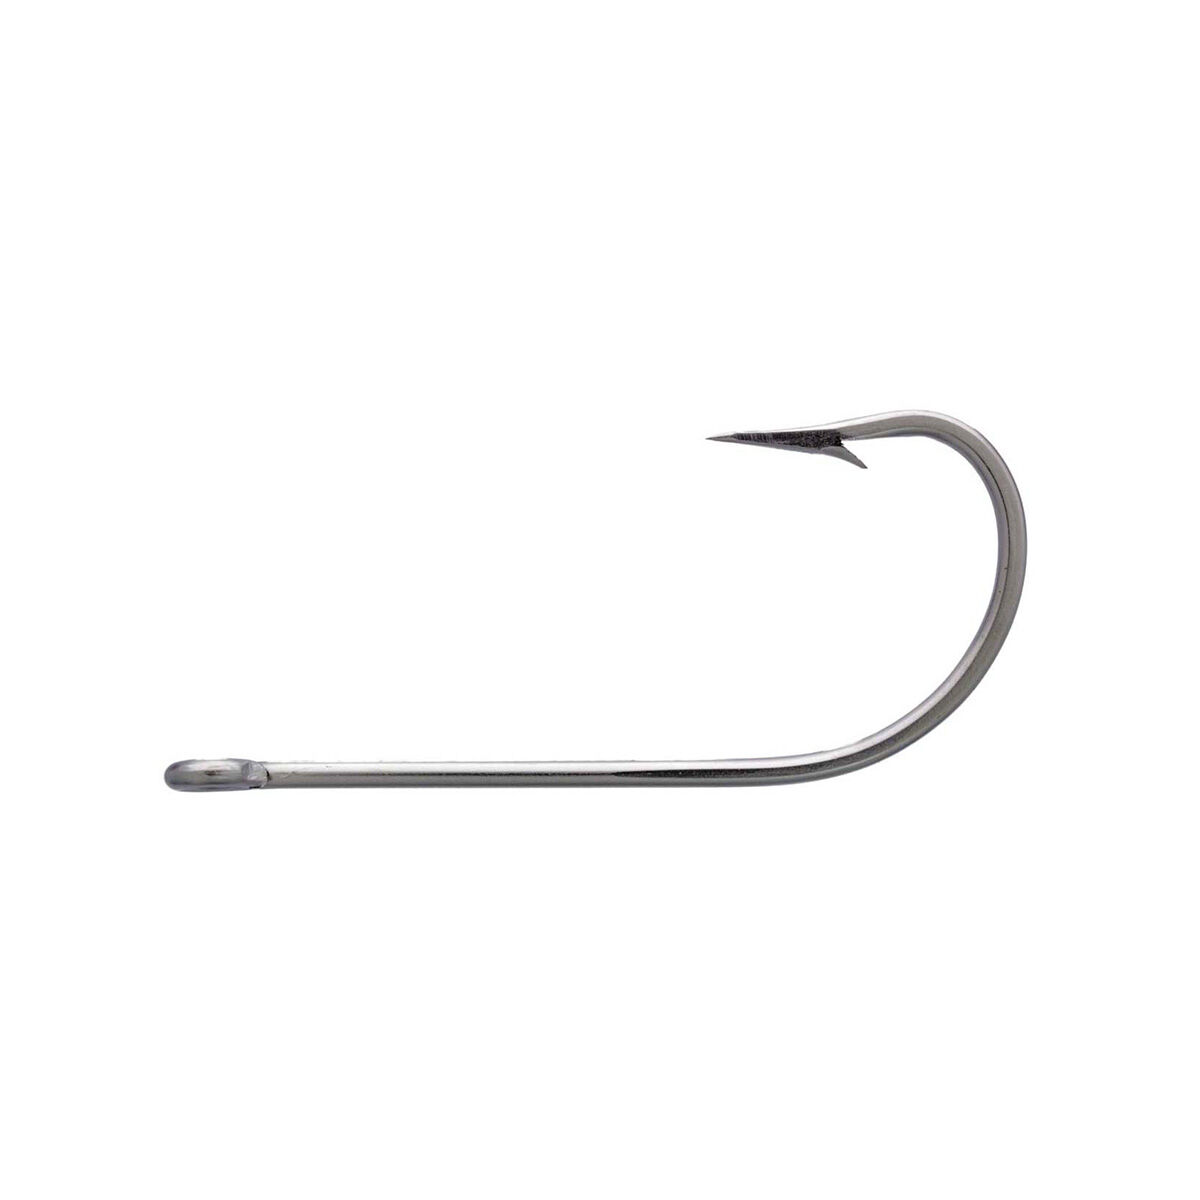 Mustad Signature Fly Round Bend Dry Fly Hook with Standard Wire/Standard  Length Turned Down Eye (Pack of 50)